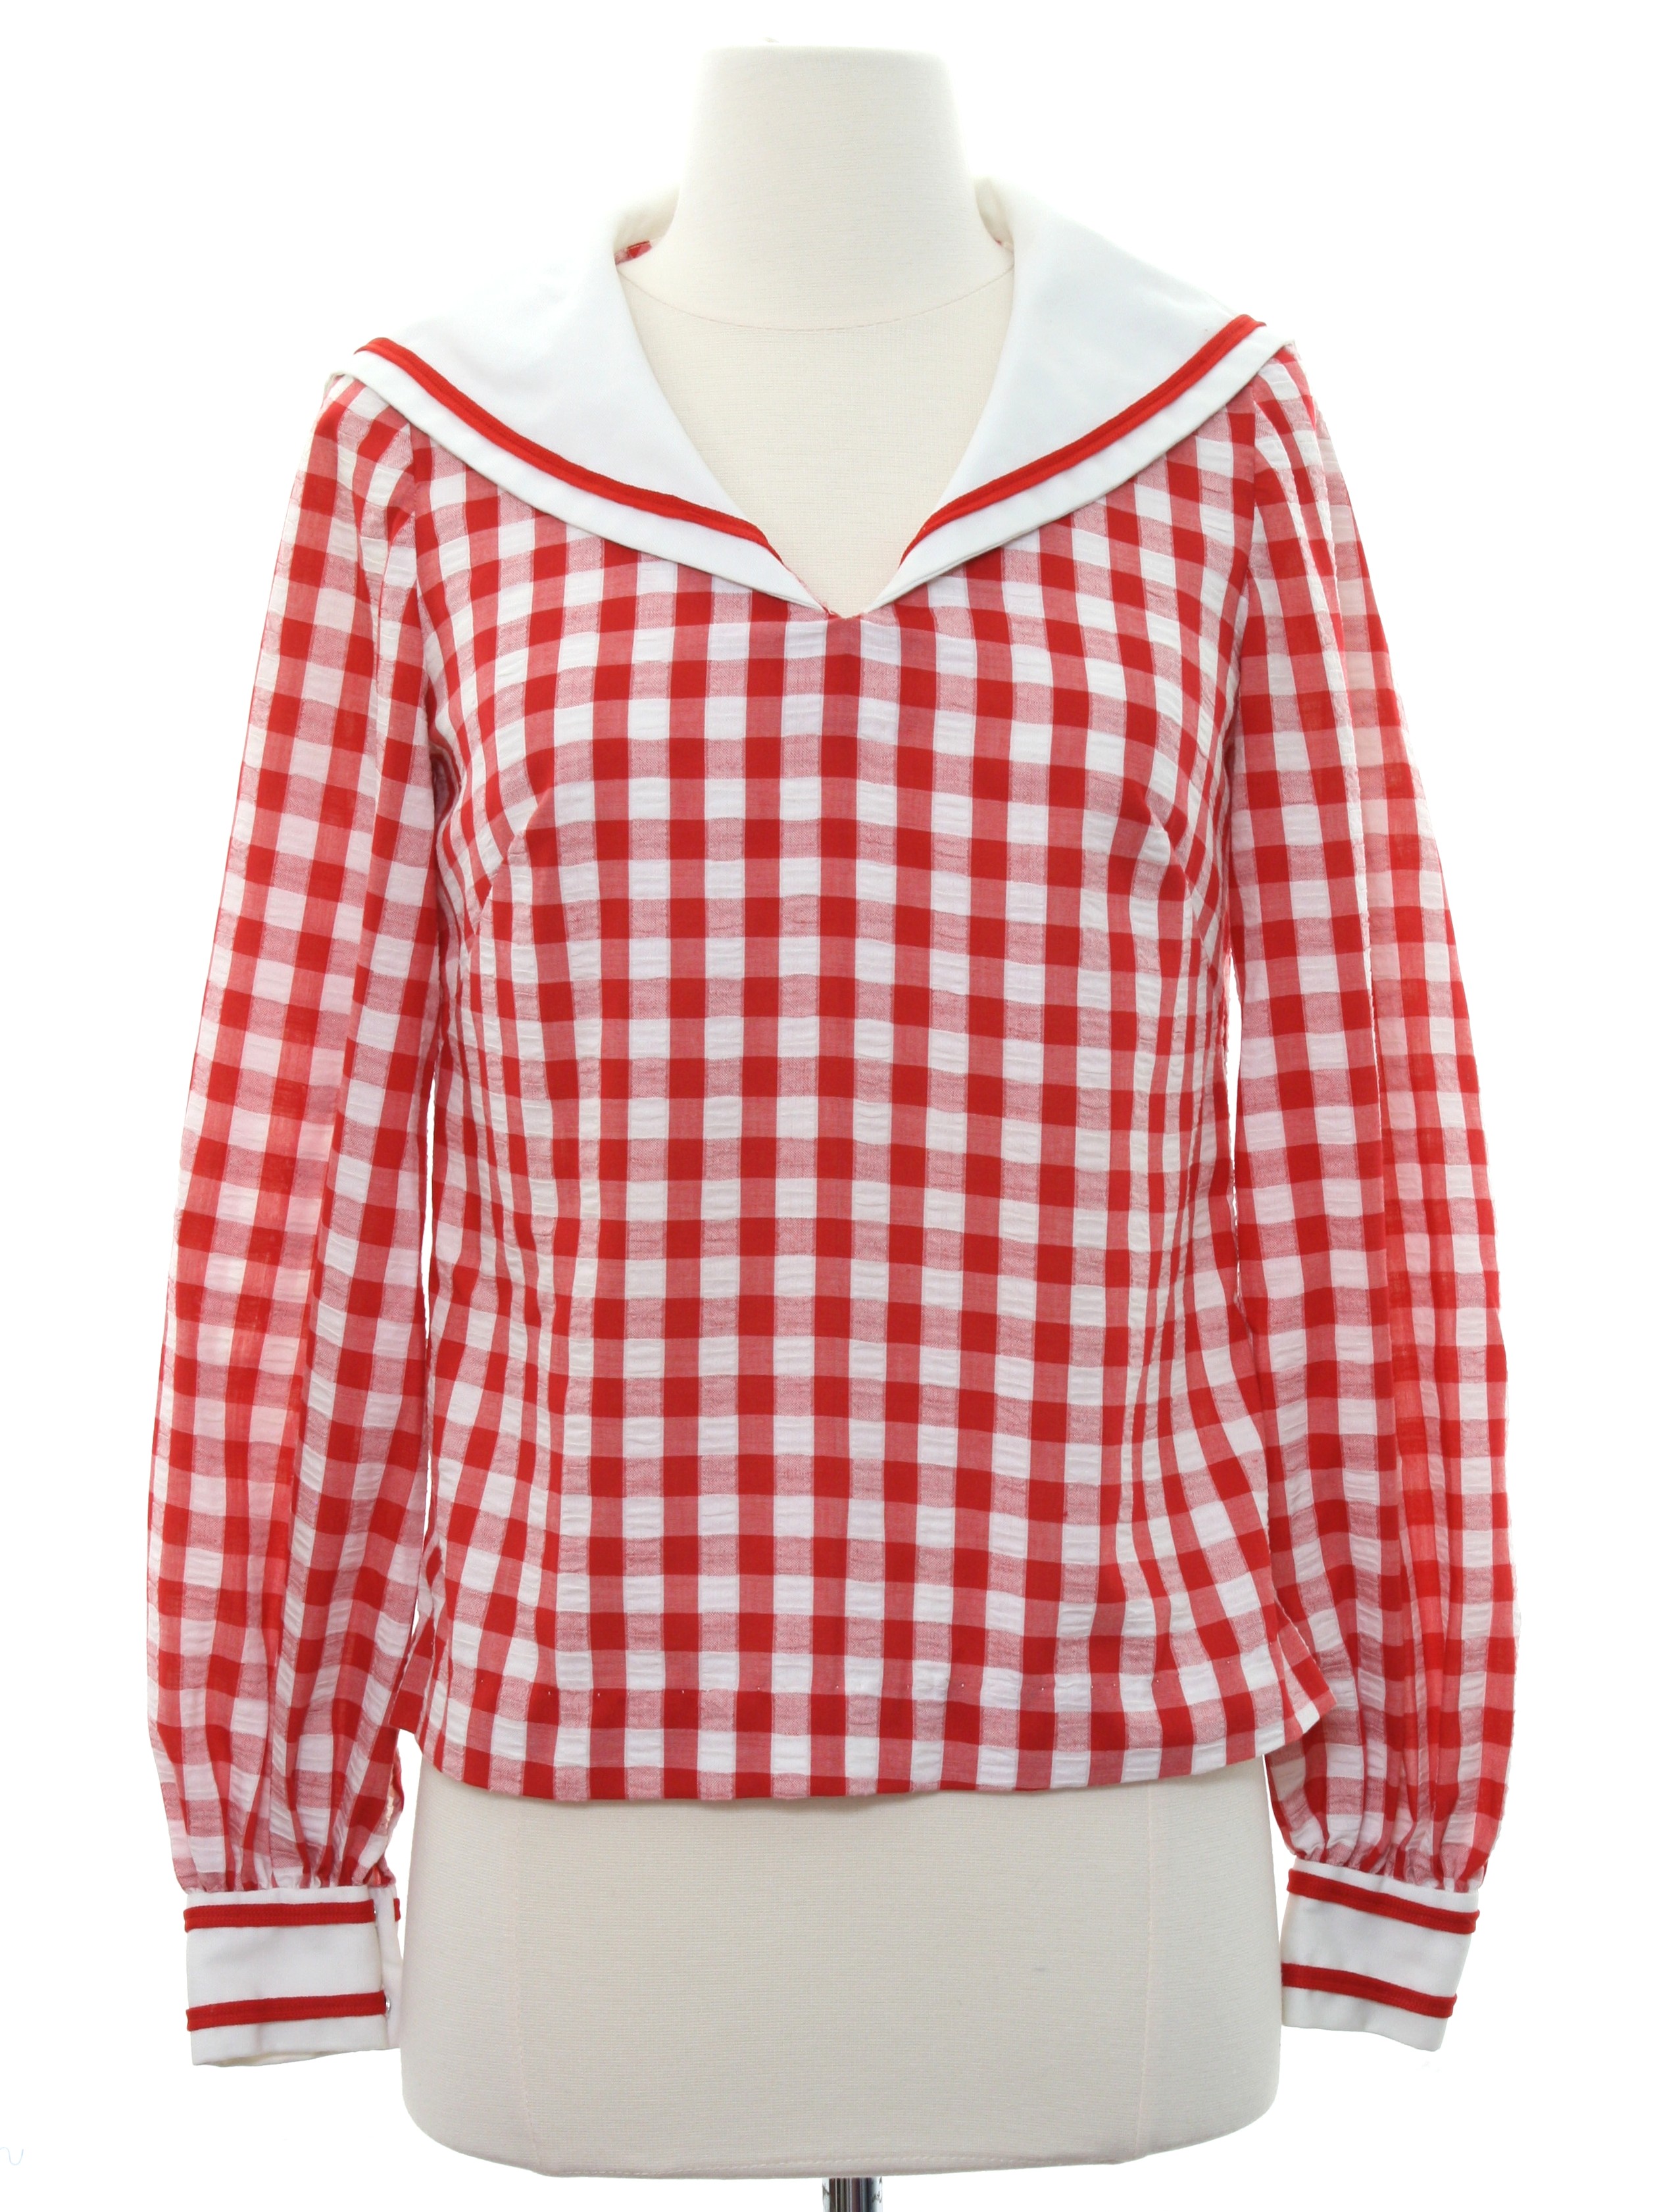 Retro Seventies Shirt: Late 70s or Early 80s -Homesewn- Girls Red and ...